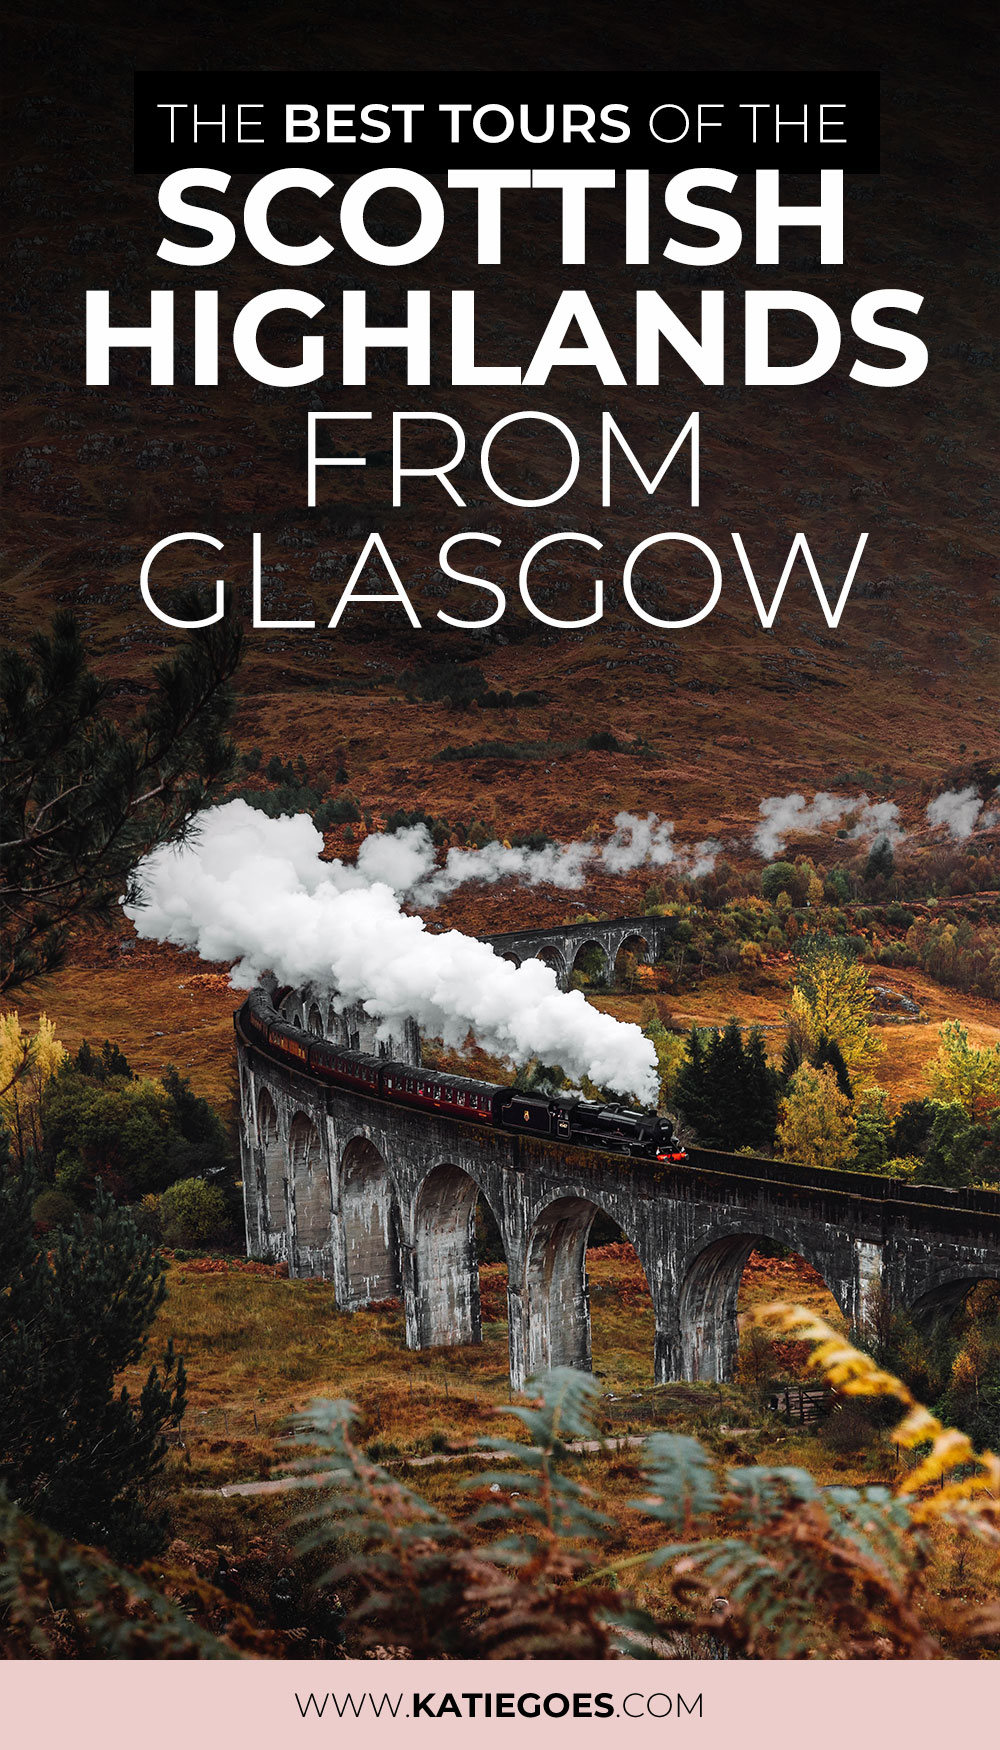 The Best Scottish Highland Tours from Glasgow